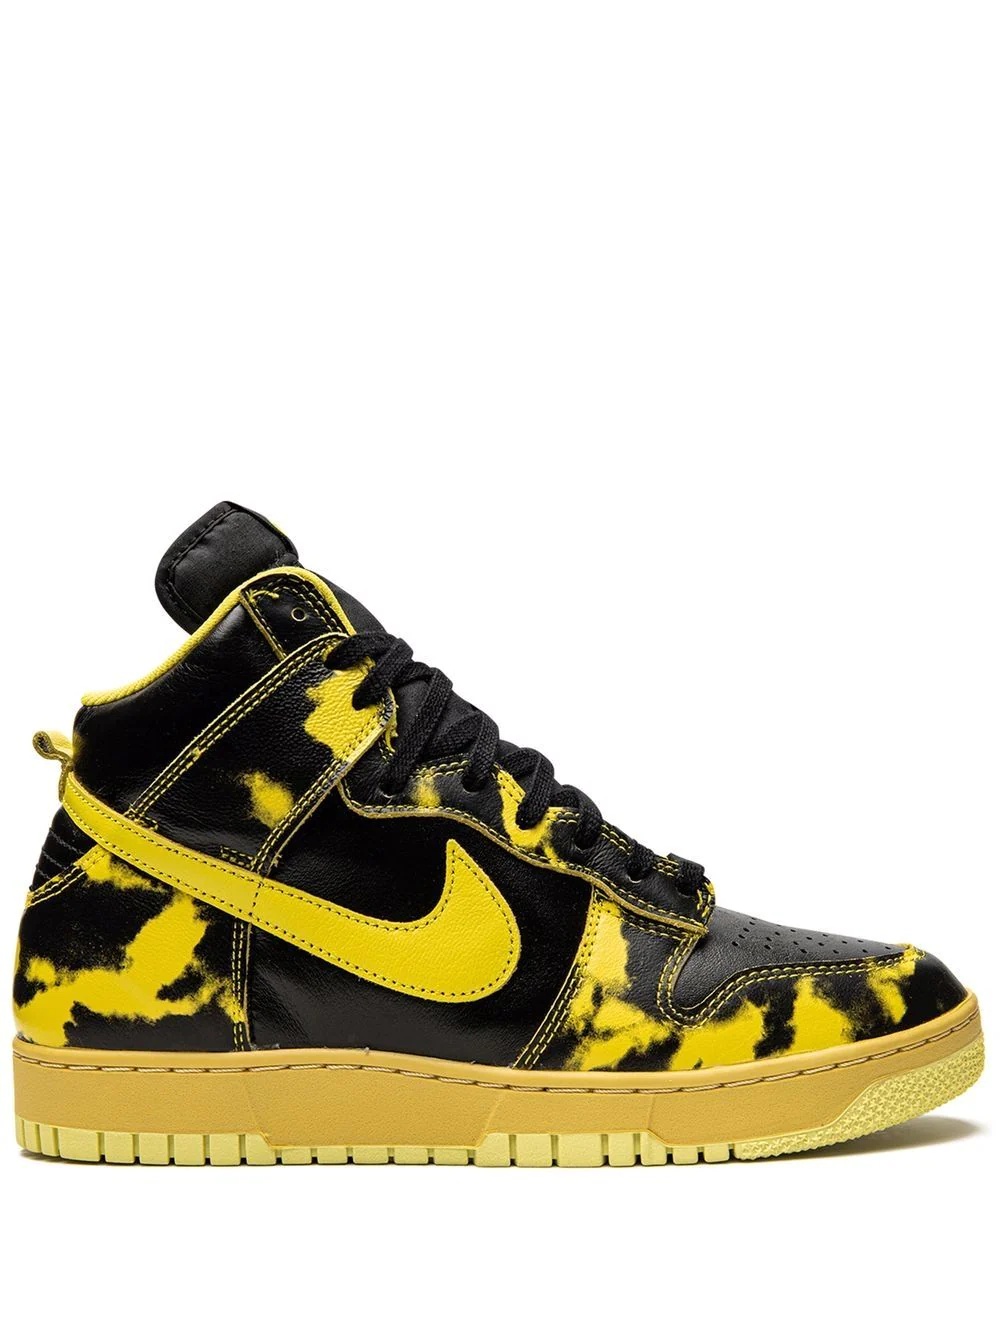 Dunk High 1985 "Yellow Acid Wash" sneakers - 1